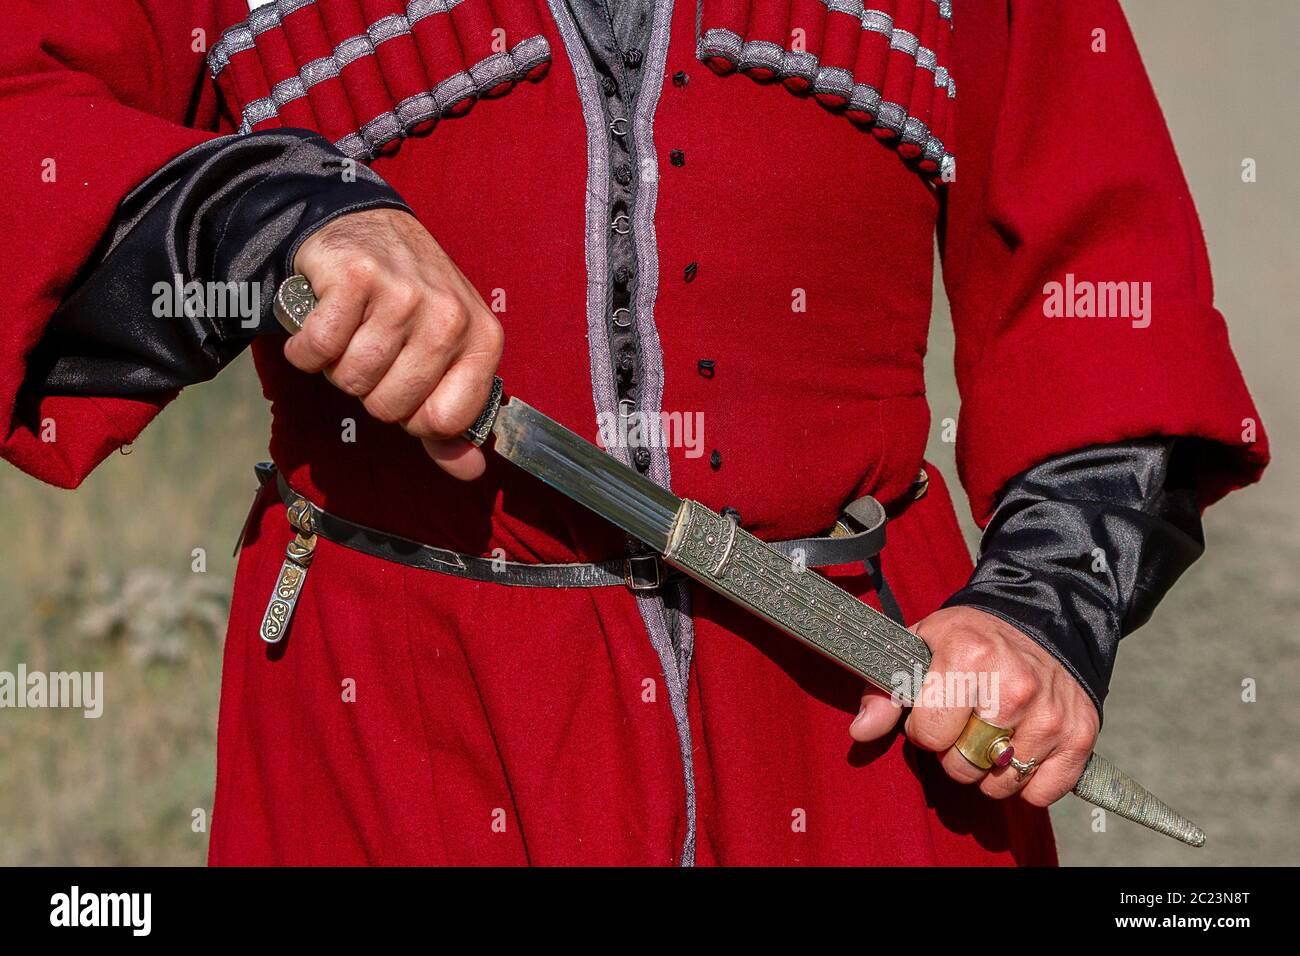 Georgian man in traditional clothes pulling the dagger, Caucasus Mountains, Georgia Stock Photo